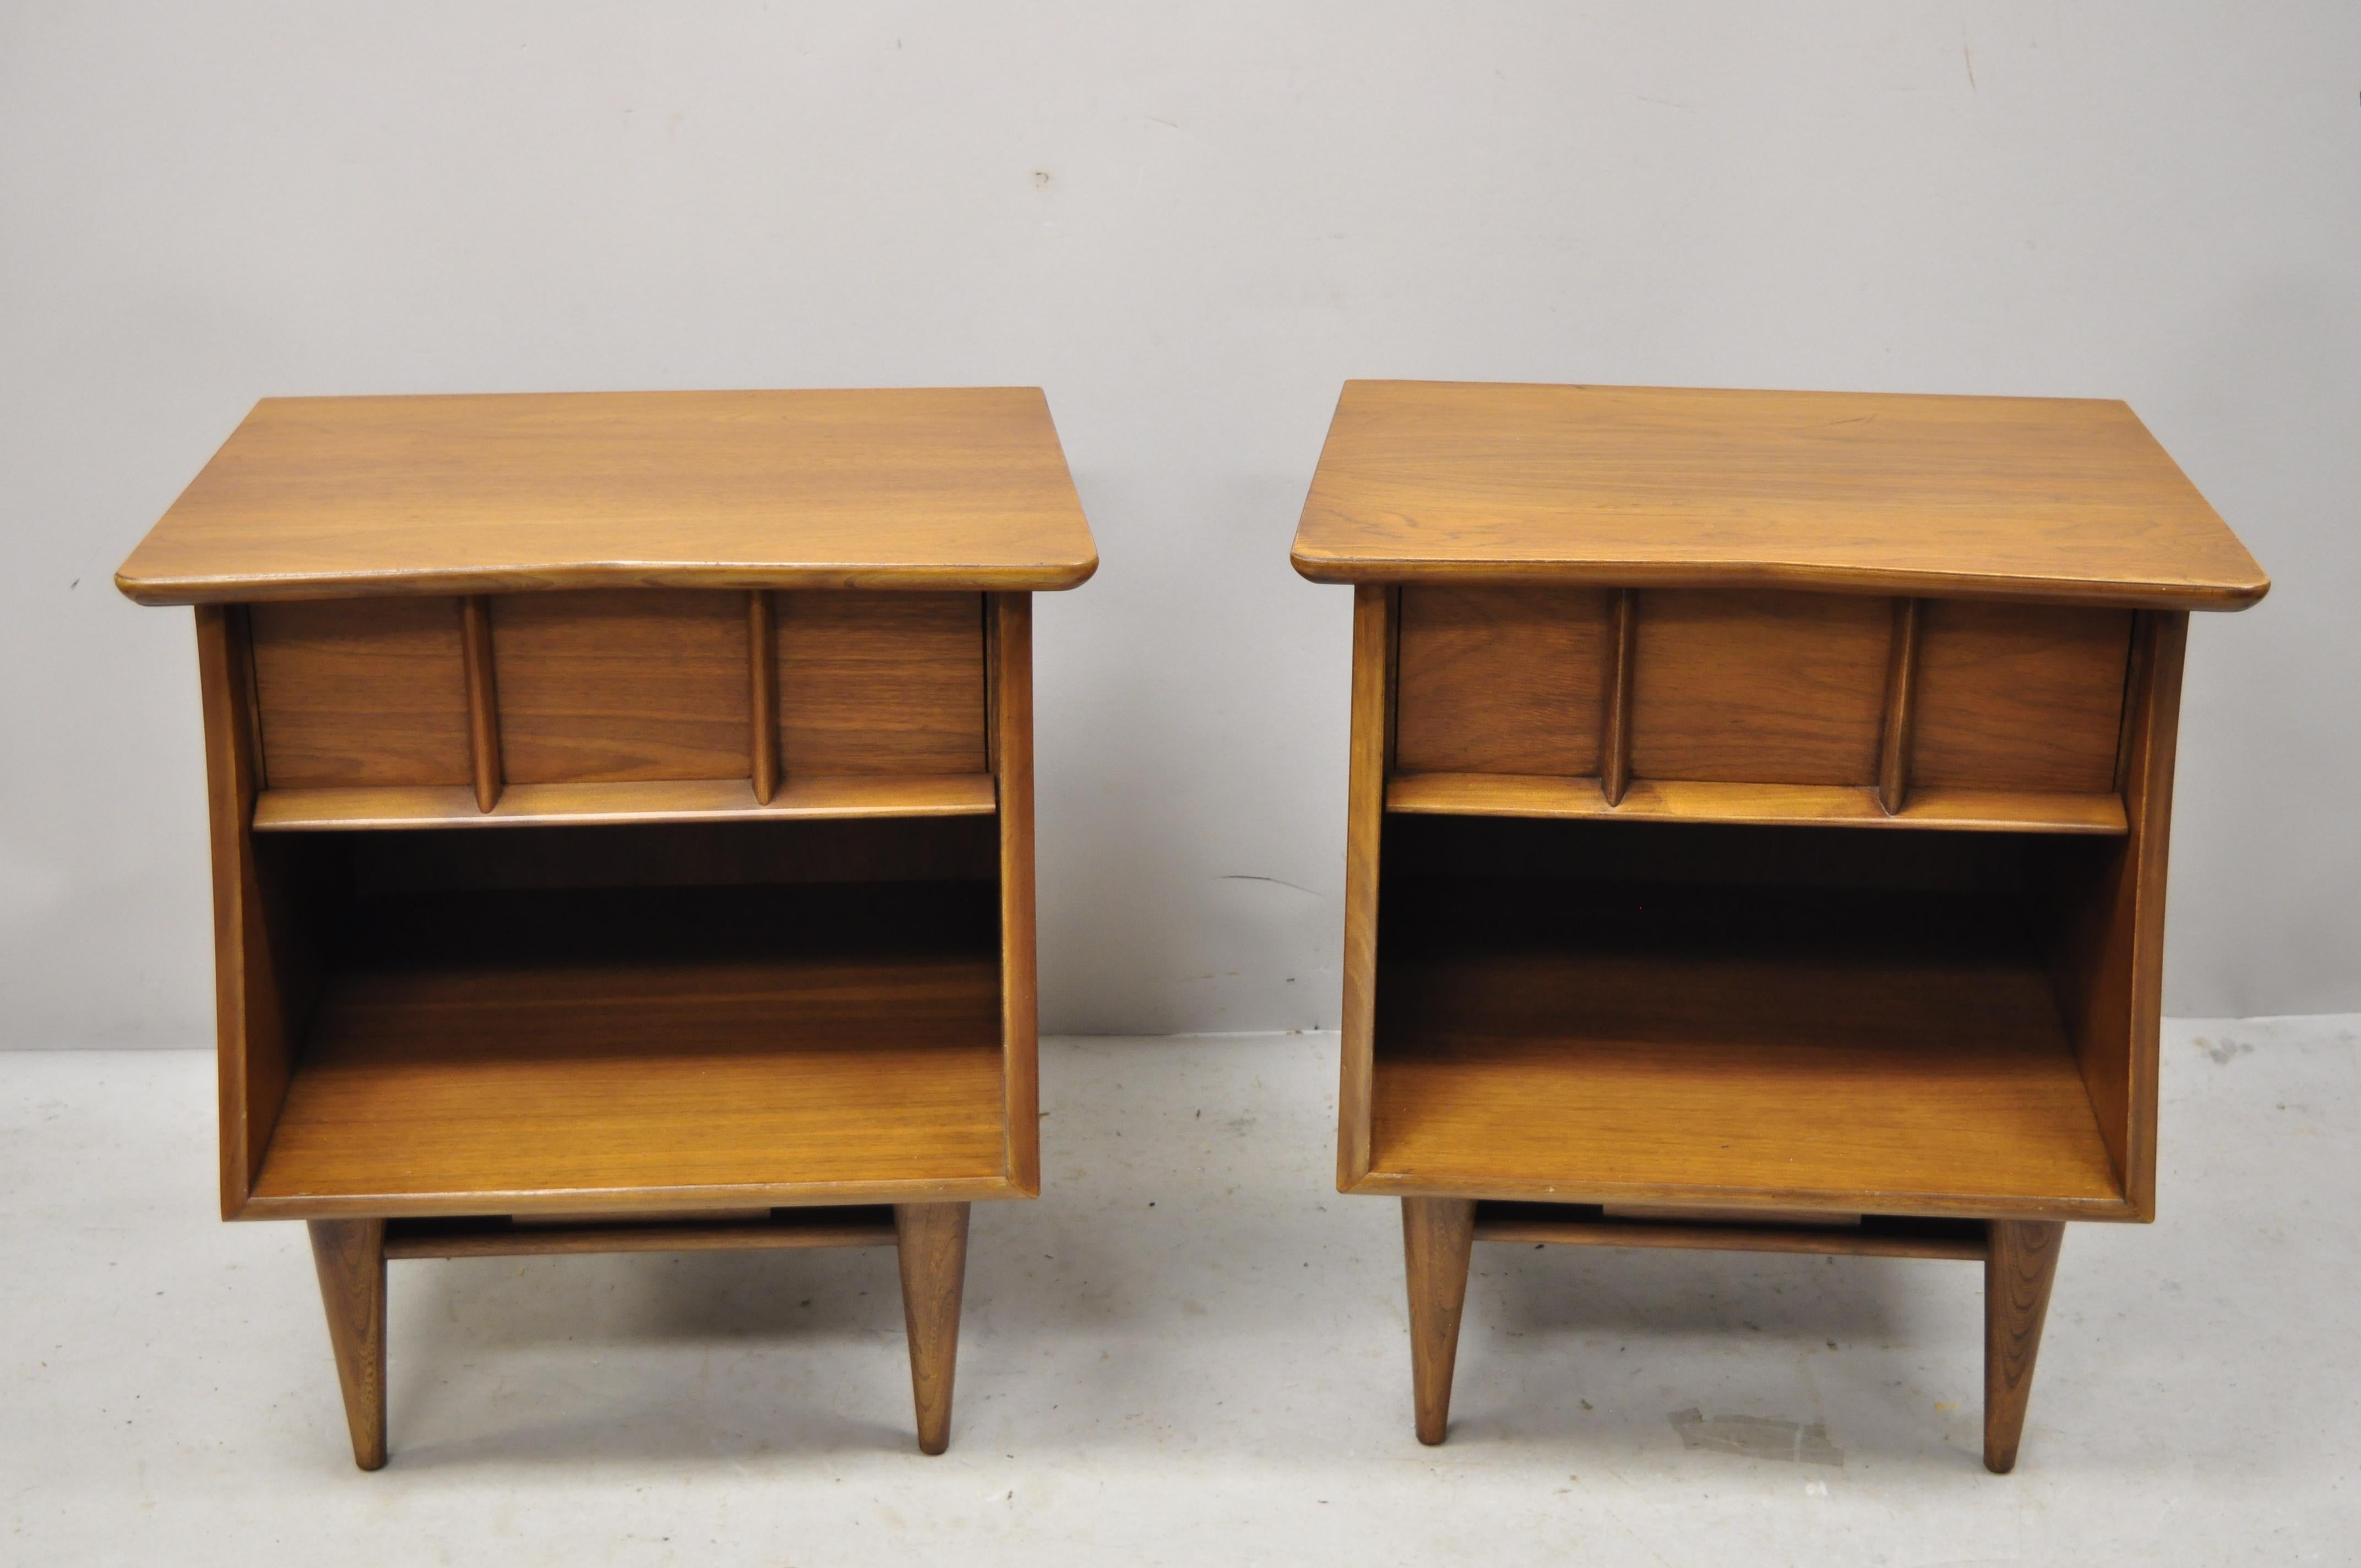 Mid-Century Modern Kent Coffey The Eloquence sculptural walnut nightstands - a pair. Item features angled tops, beautiful wood grain, original label, 1 dovetailed drawer, tapered legs, clean modernist lines, quality American craftsmanship, sleek